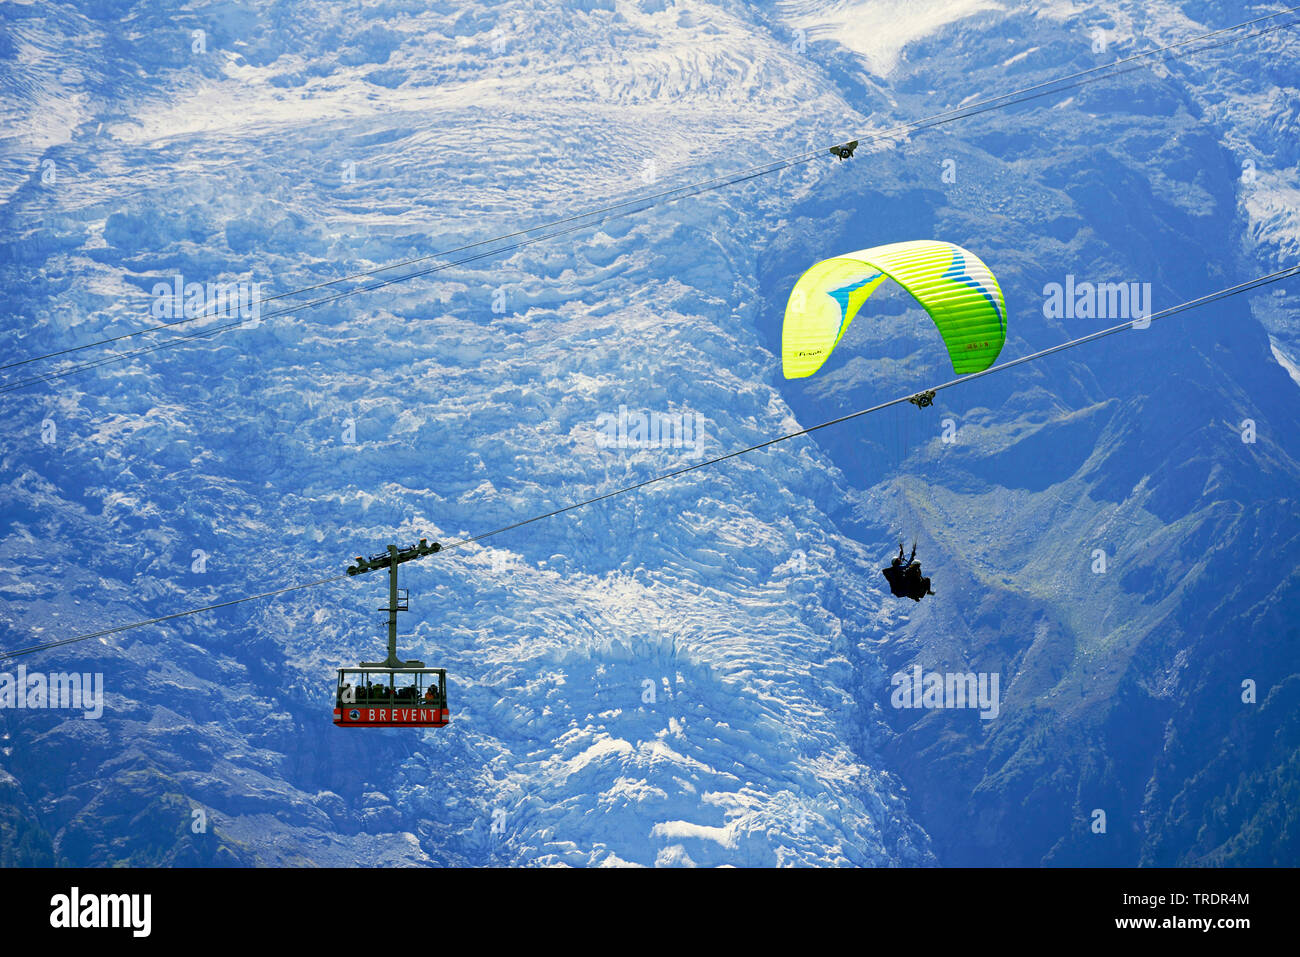 Paragliding and cablecar Telepherique du Brevent in front of the glacier of Mont Blanc massif, France, Savoie, Chamonix Stock Photo